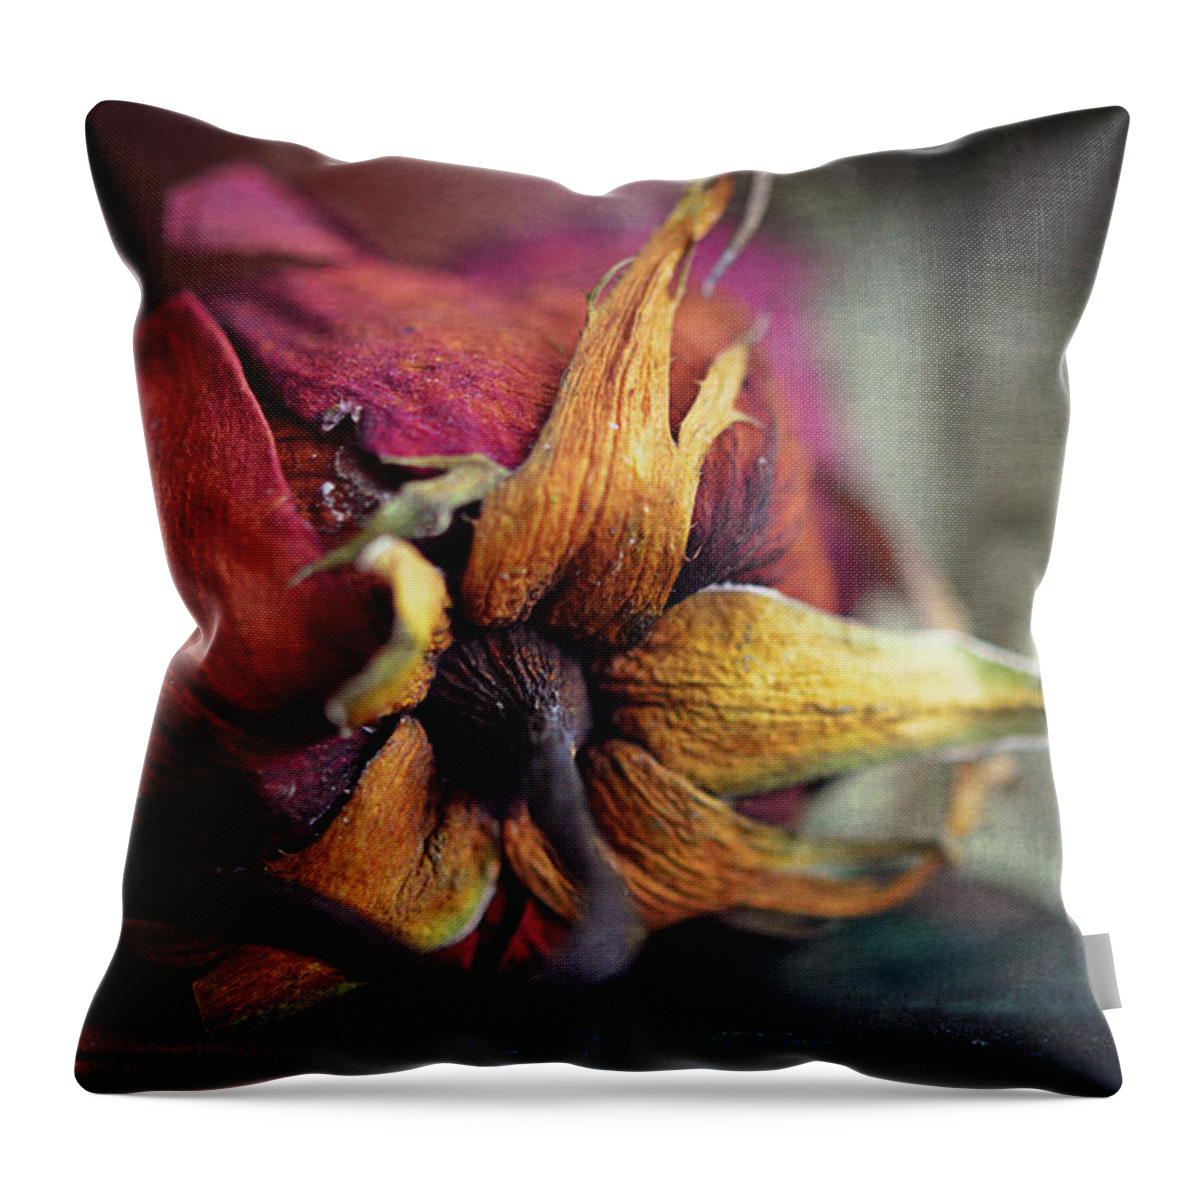 Red Rose Throw Pillow featuring the photograph The Forgotten Rose by Maria Angelica Maira